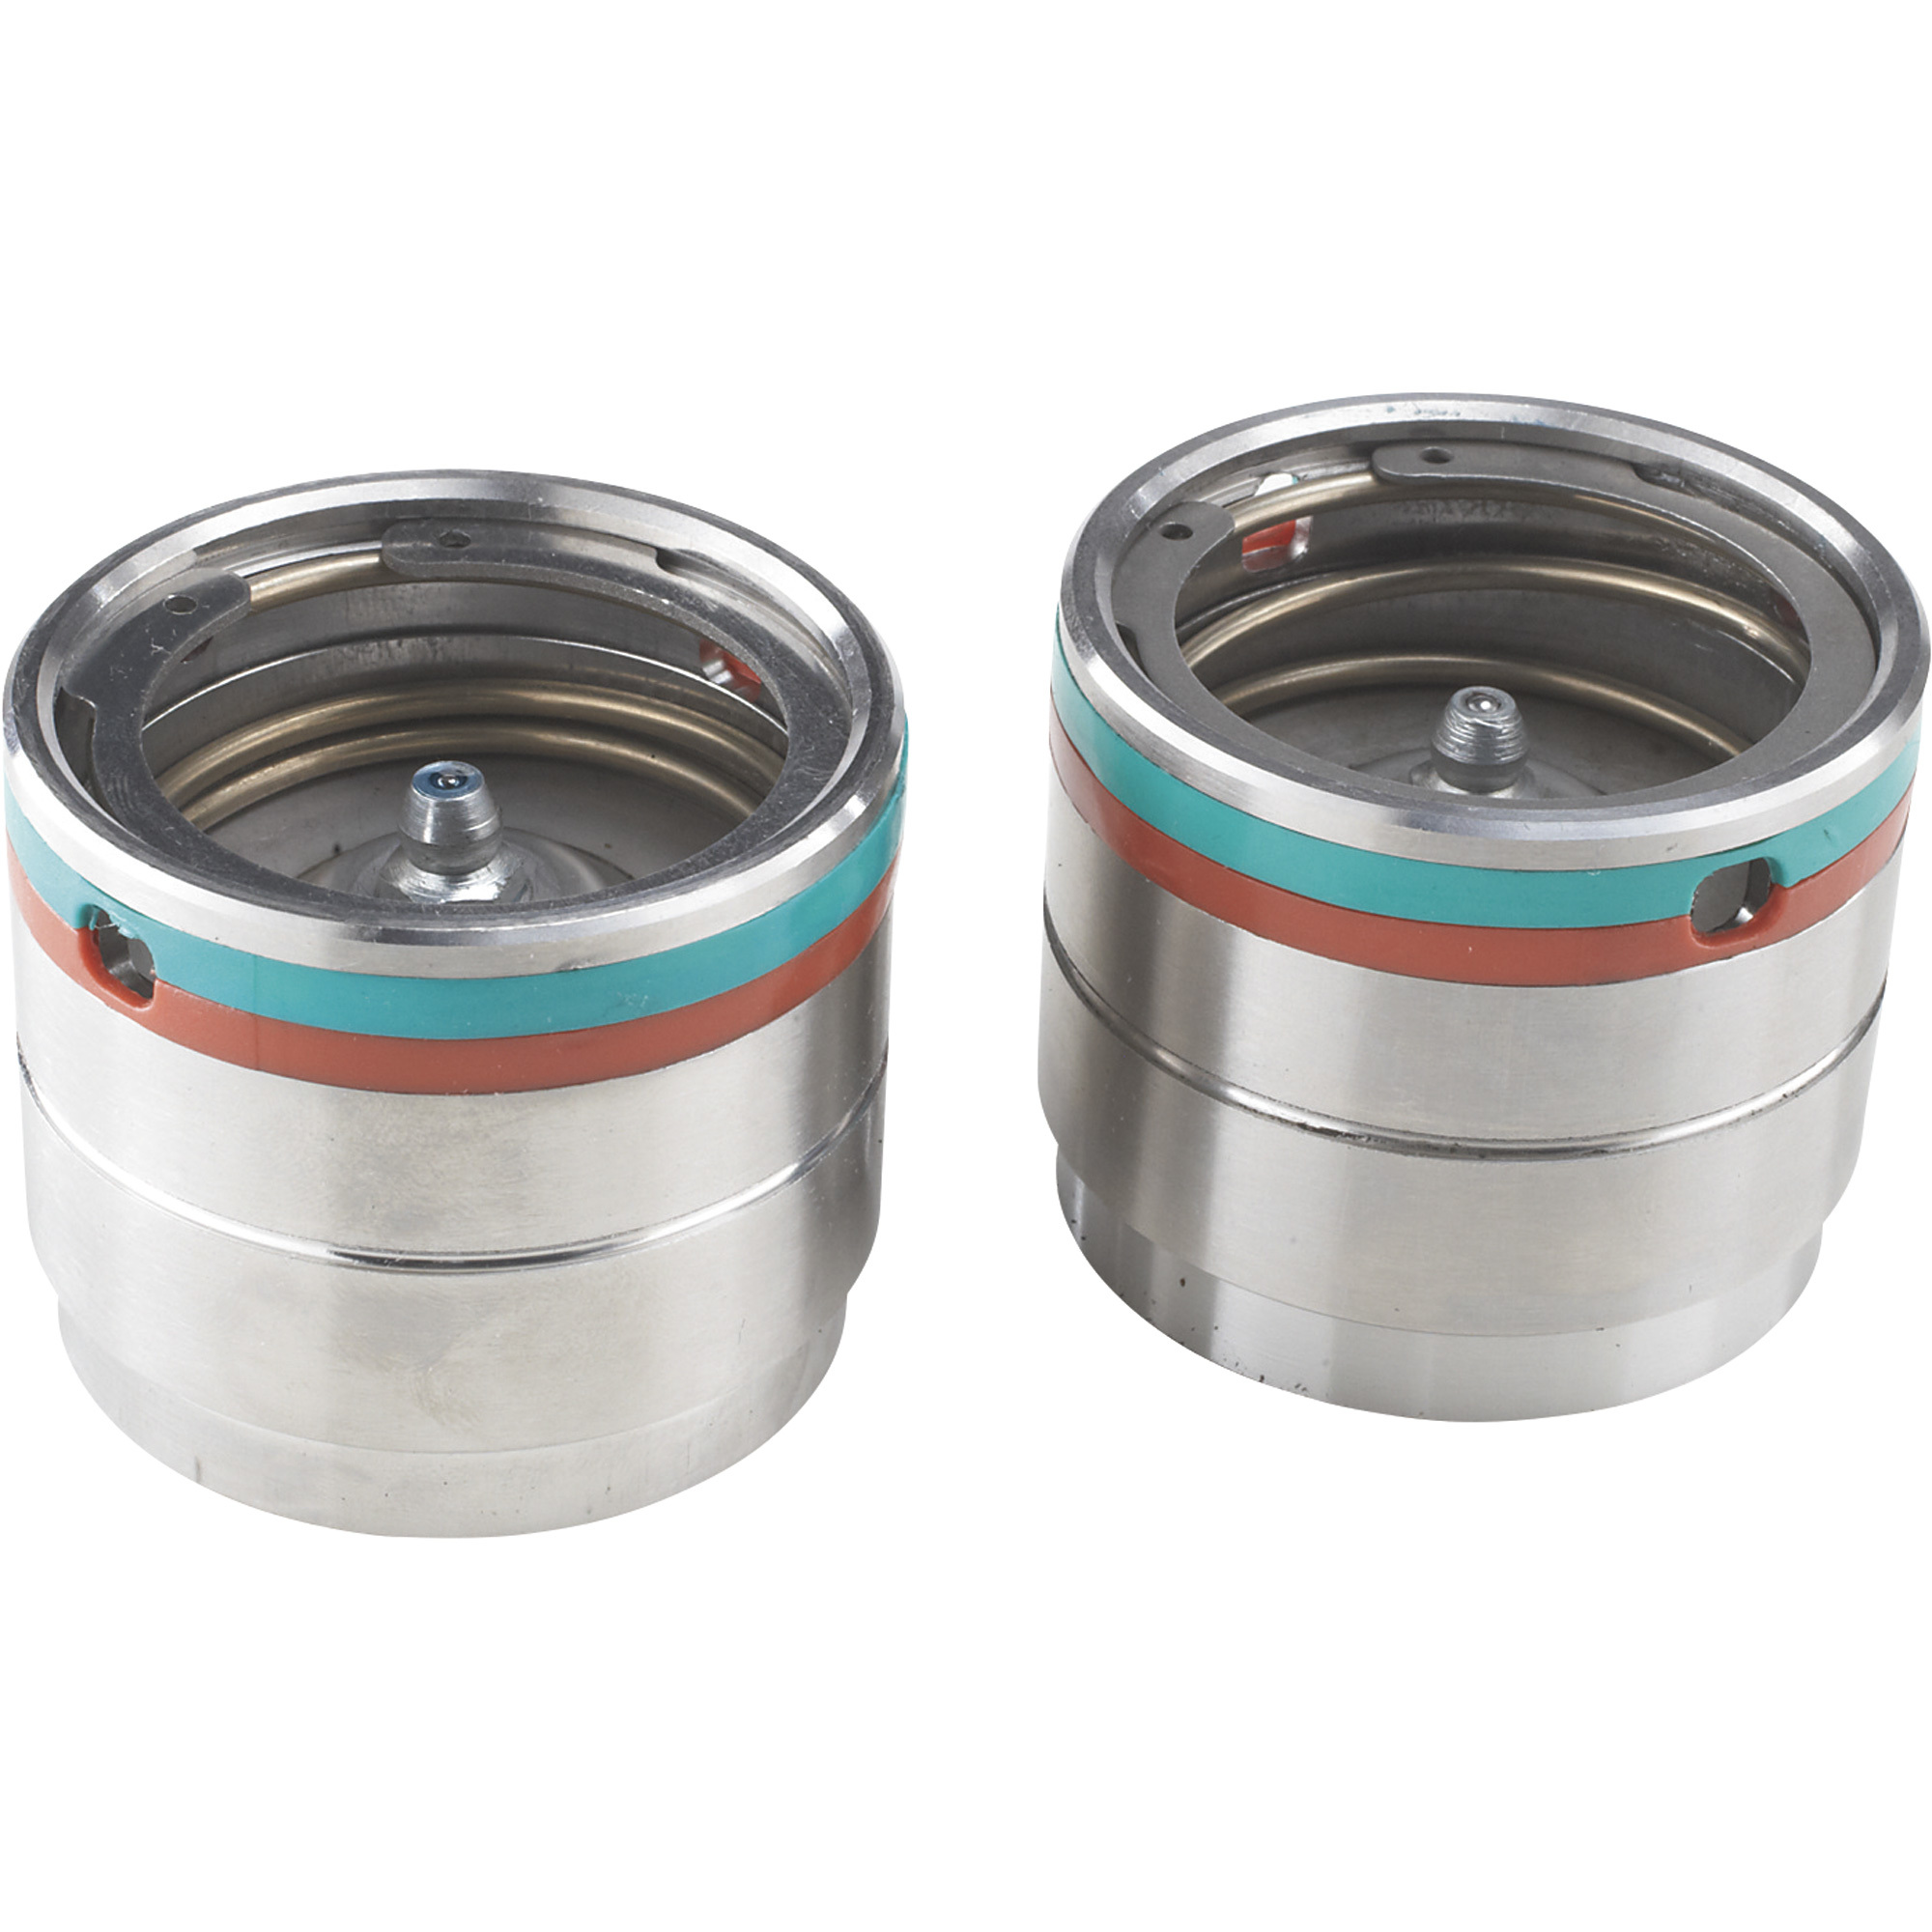 Ultra-Tow High-Performance Trailer Bearing Protectors â Pair, Fits 1.98Inch Hubs, Stainless Steel, Model 5712940